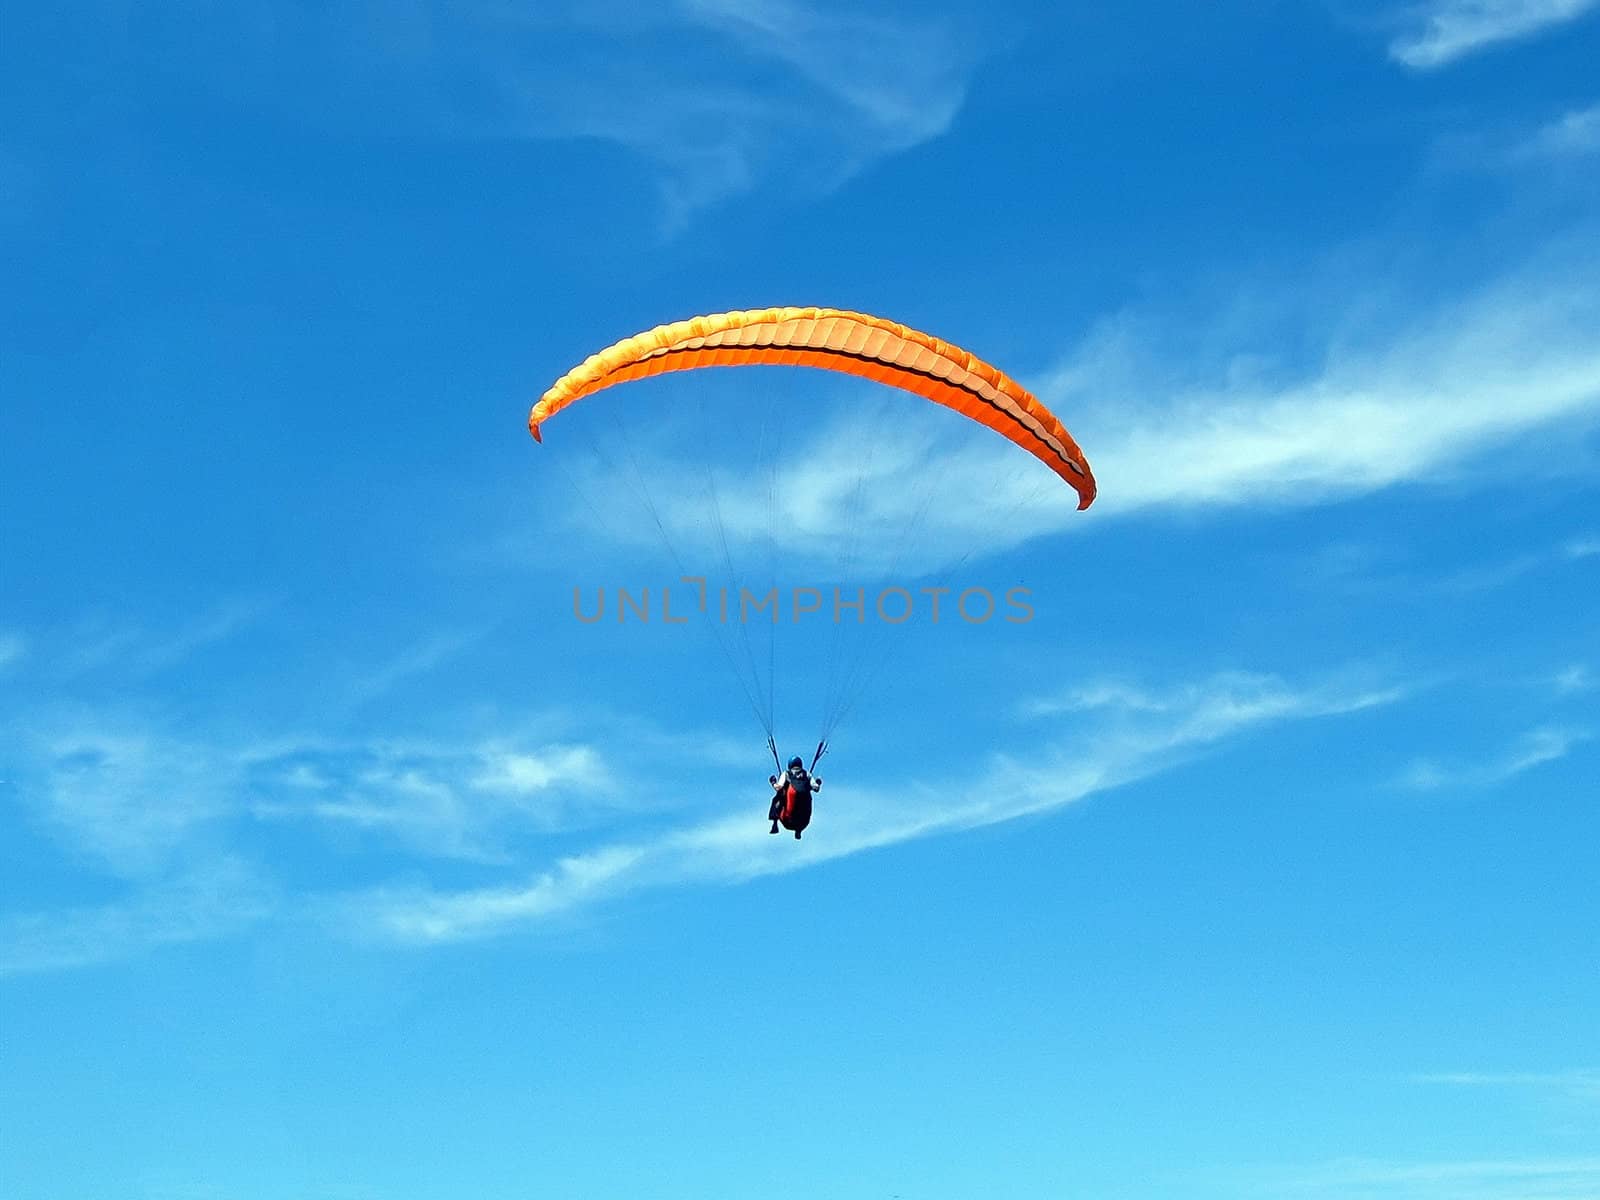 Paraglider on a blue sky with thin clouds